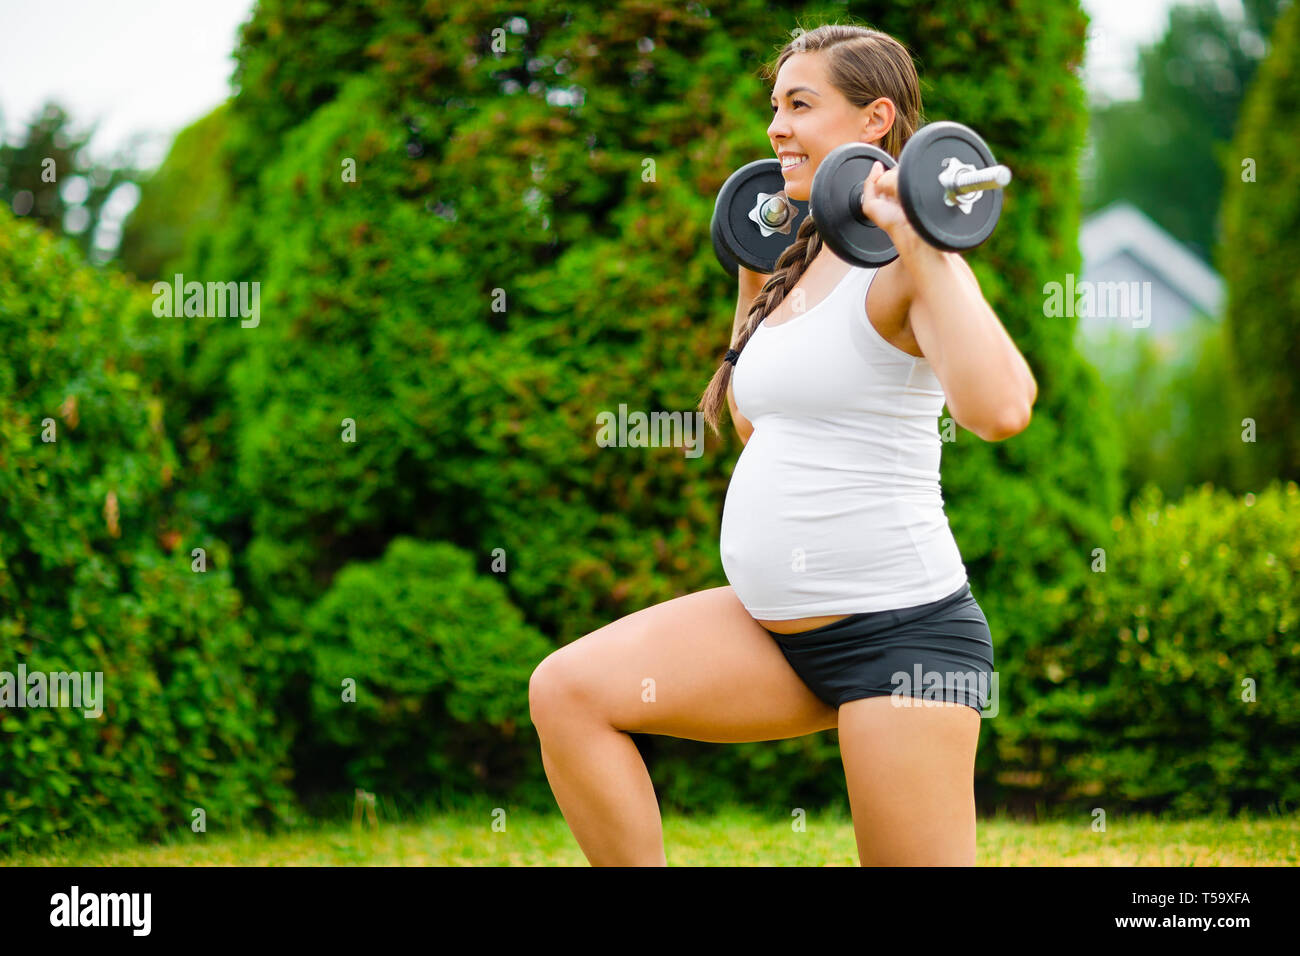 Pregnant Woman Doing Kneeling Lunges With Dumbbells In Park Stock Photo